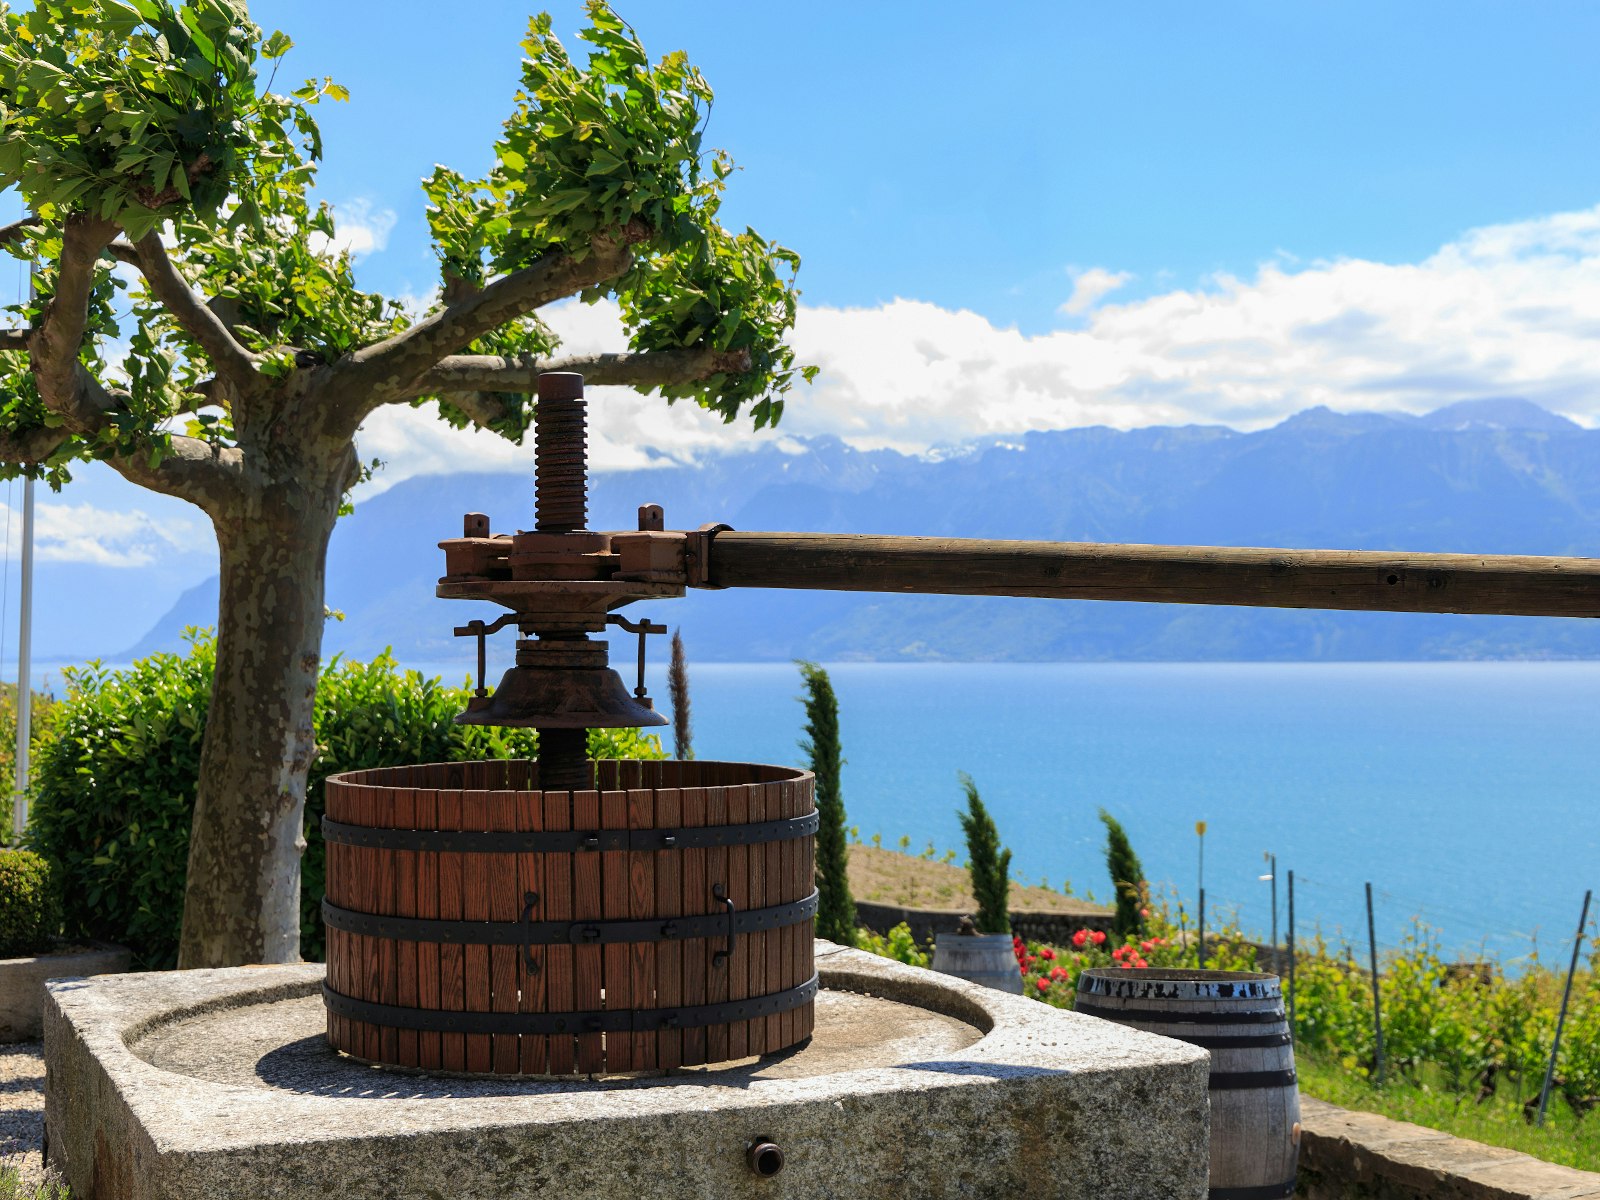 Traditional wine press in a vineyard of the famous Lavaux region